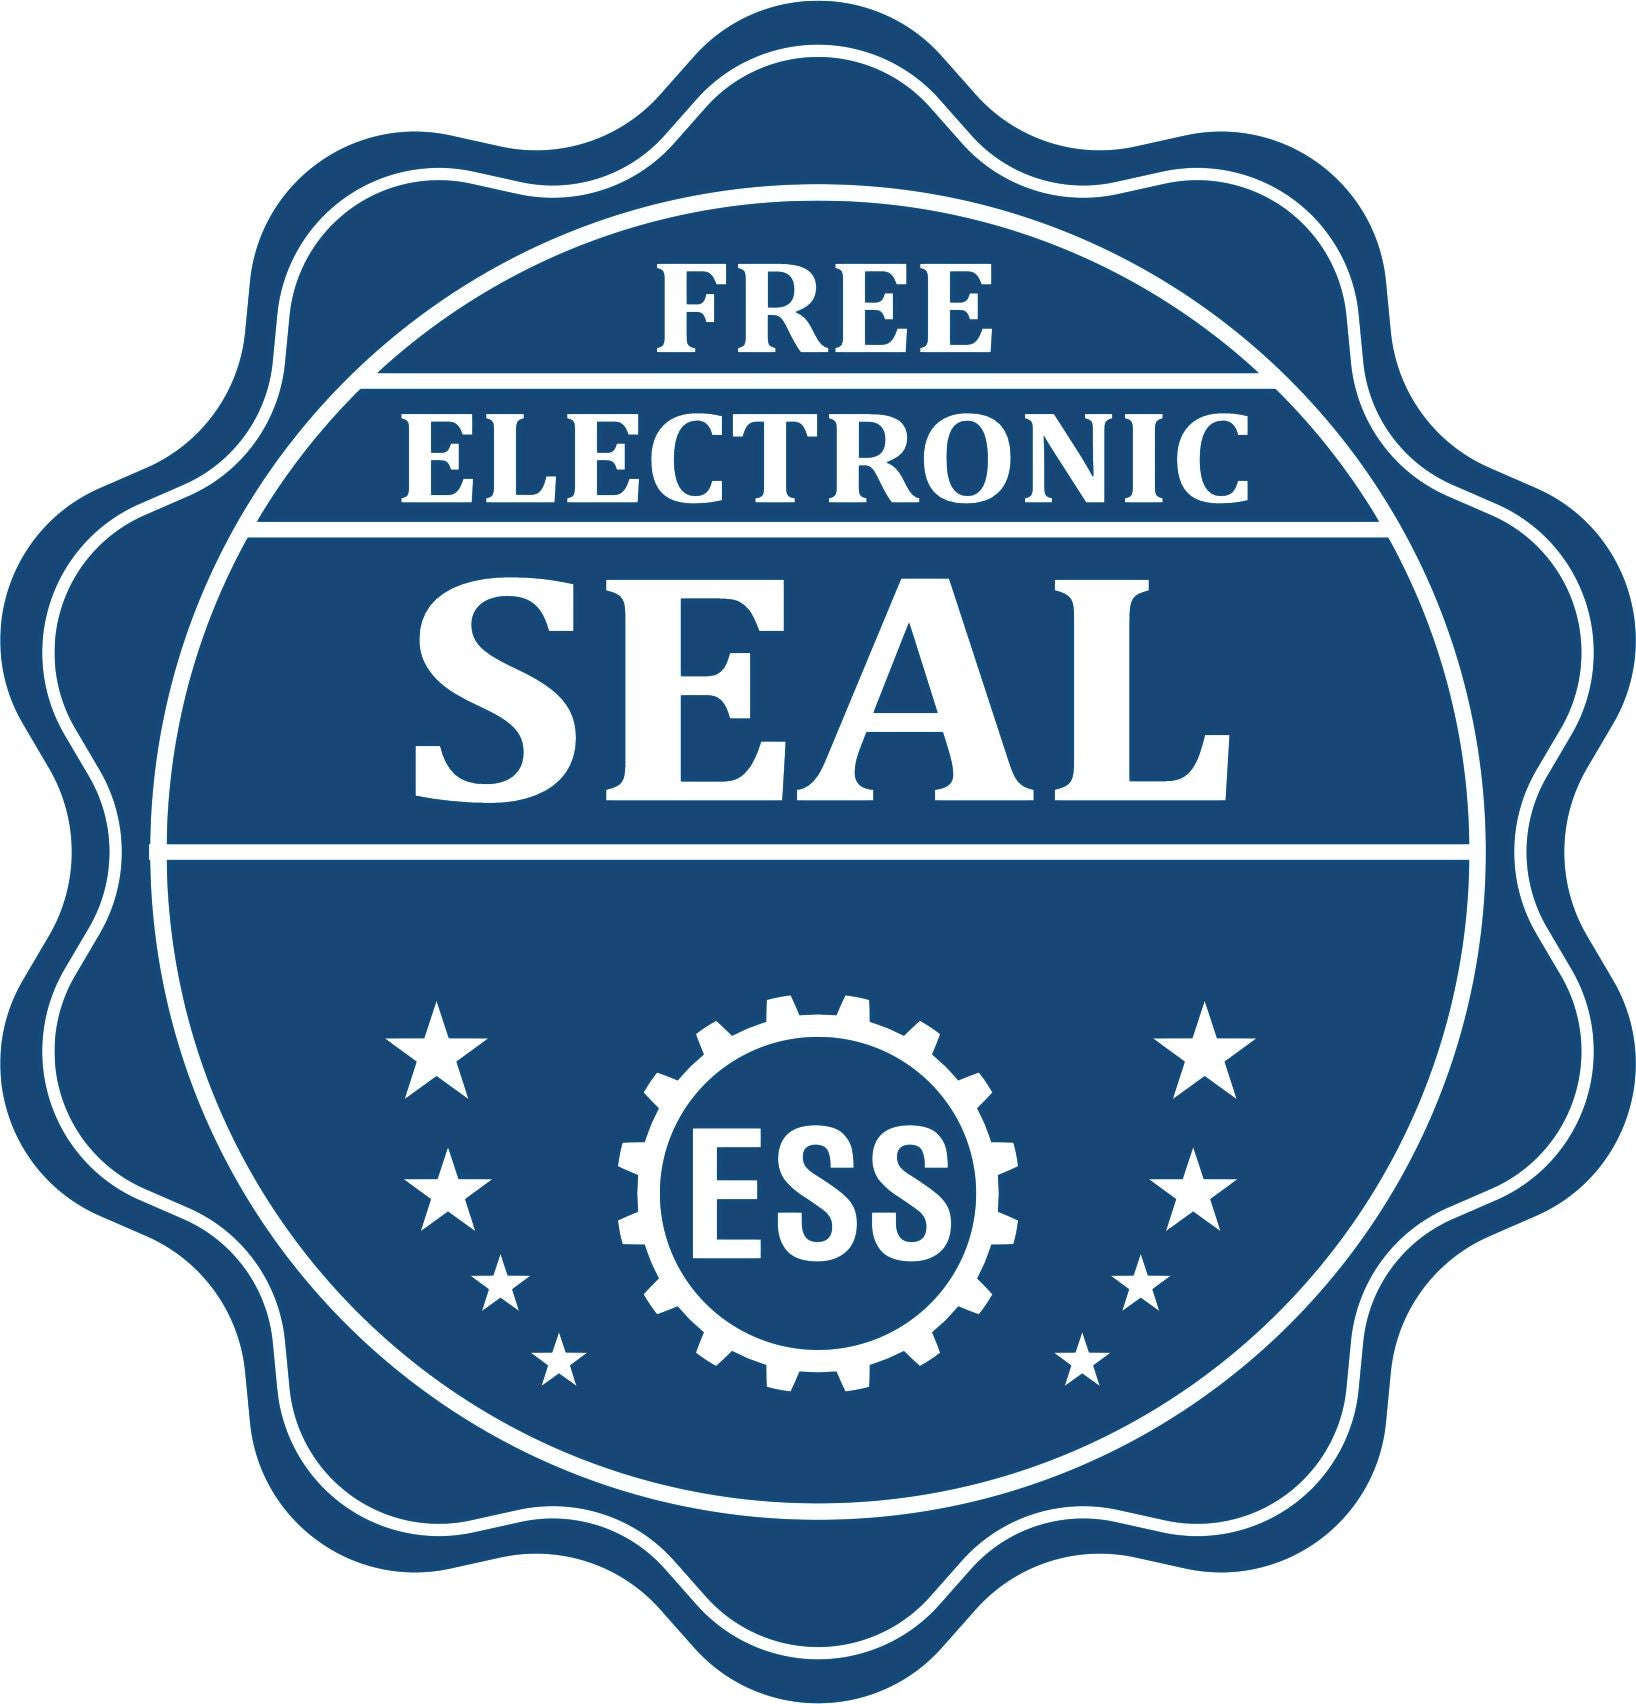 A badge showing a free electronic seal for the Extended Long Reach Maryland Surveyor Embosser with stars and the ESS gear on the emblem.